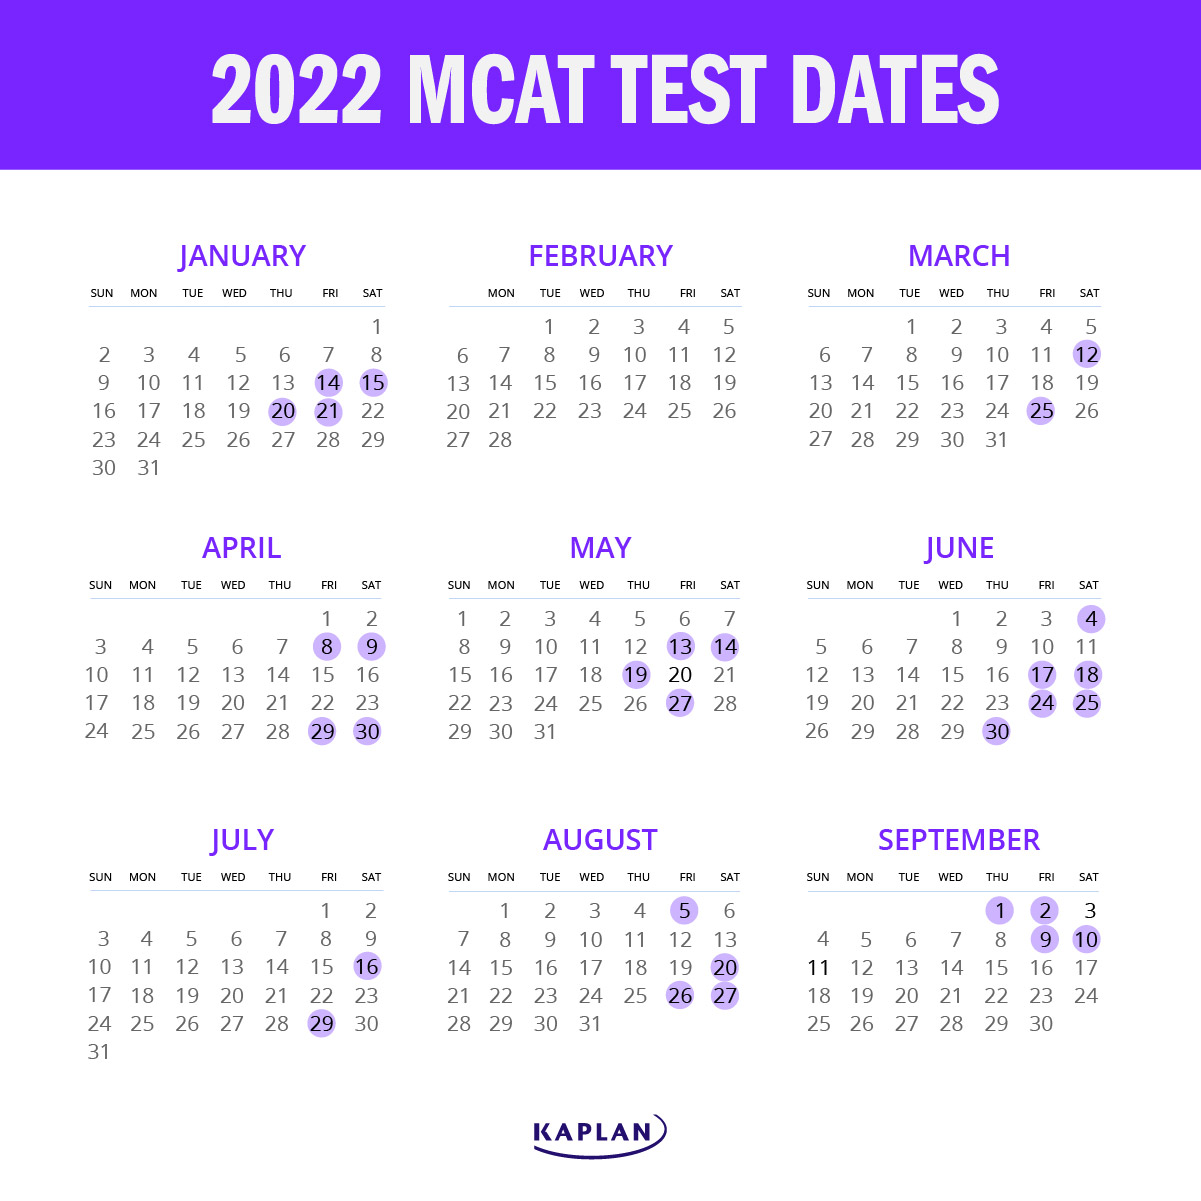 Mississippi State Exam Schedule Spring 2022 When Should I Take The Mcat In 2022? – Kaplan Test Prep